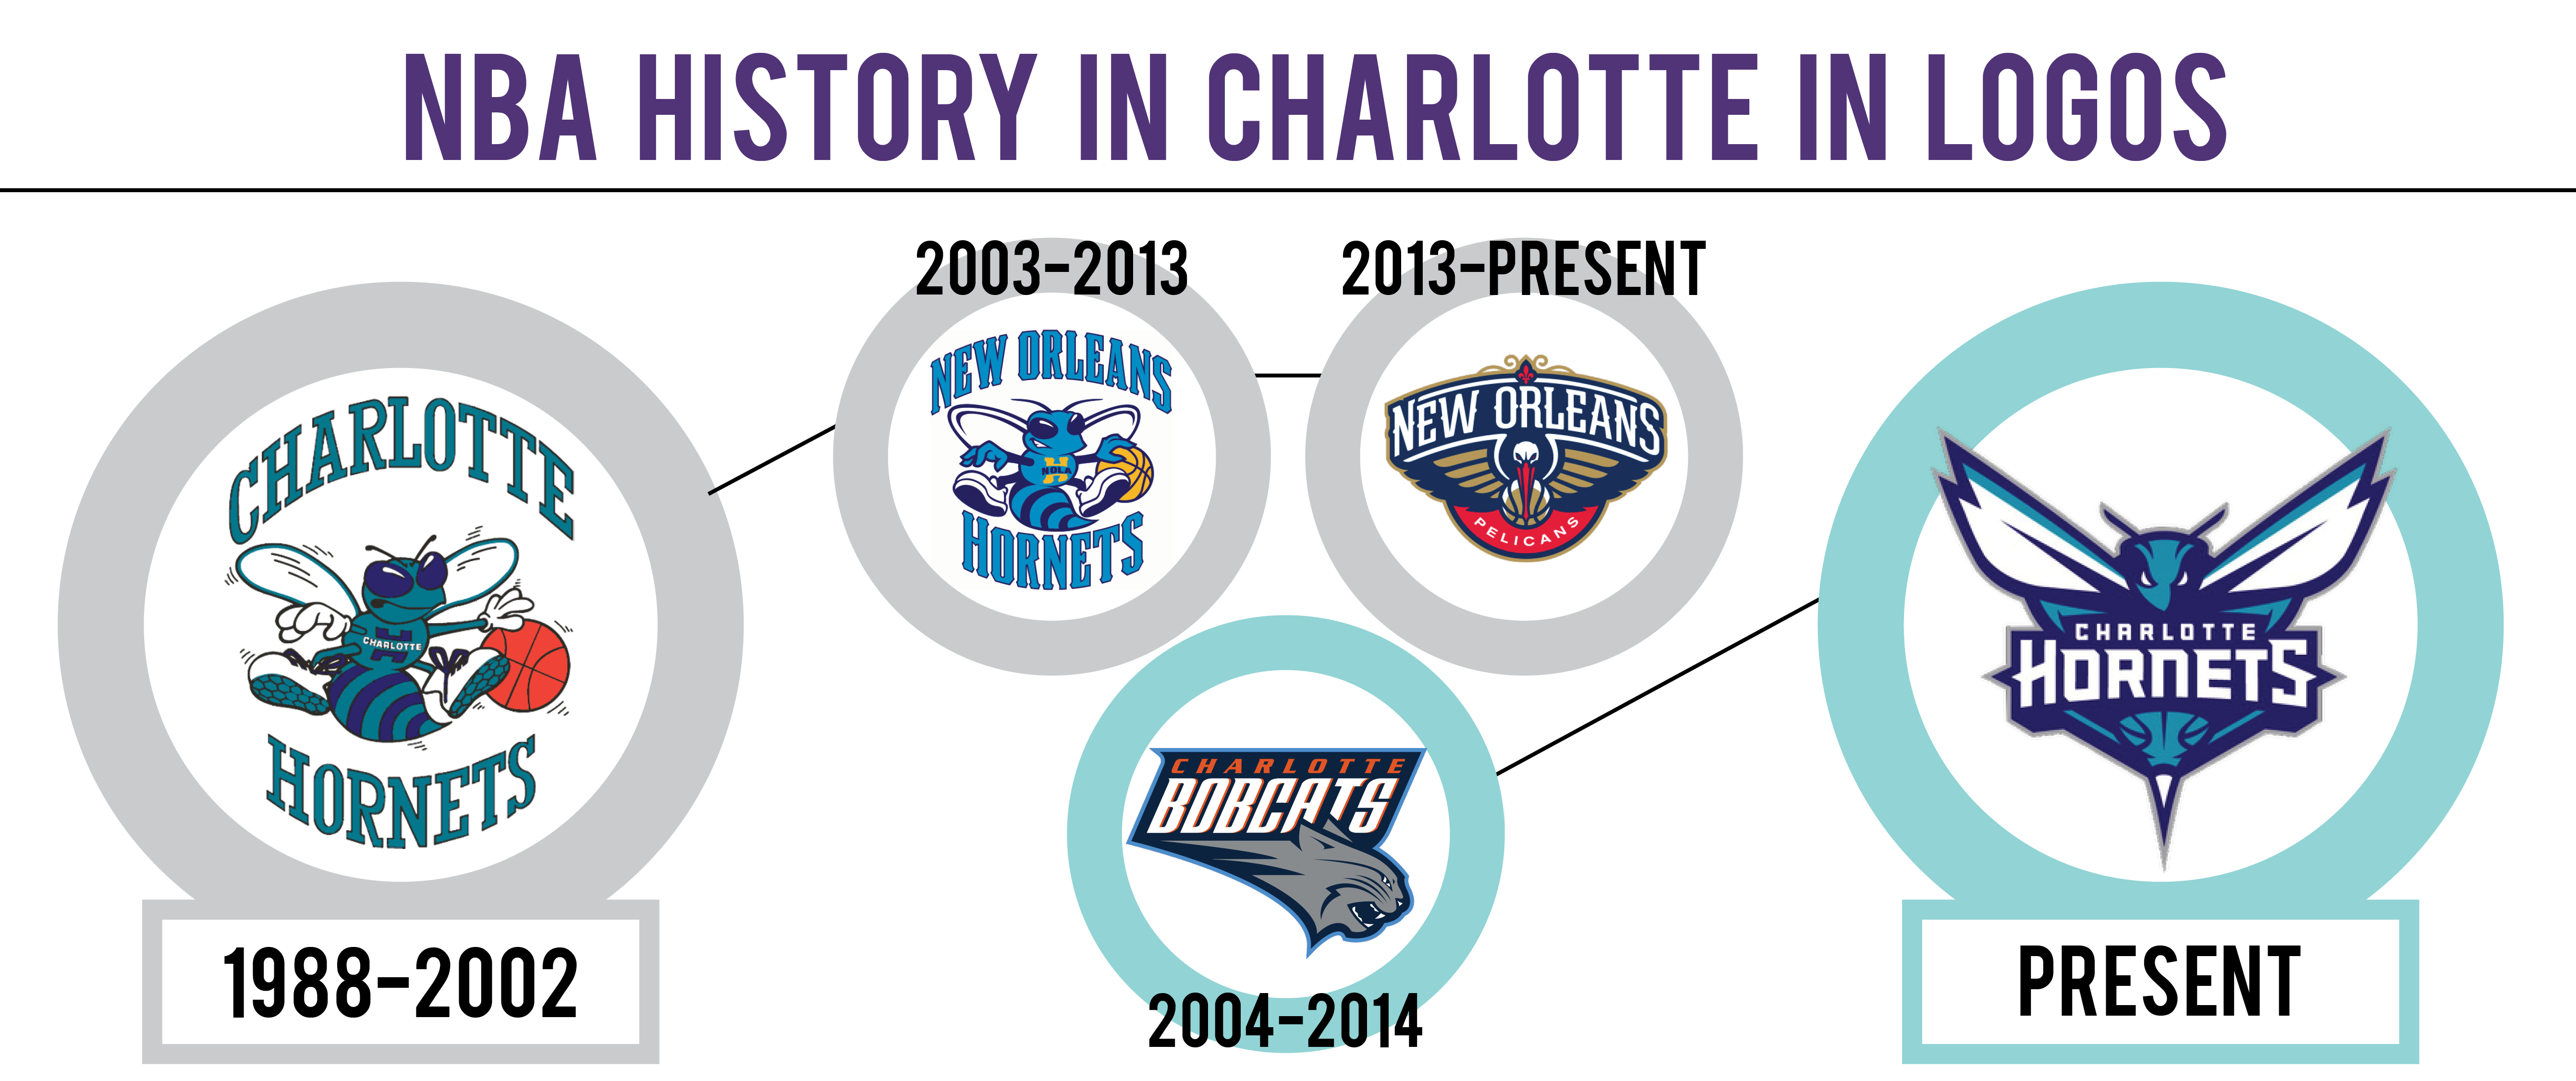 Charlotte Bobcats officially change name back to Hornets after 12 years